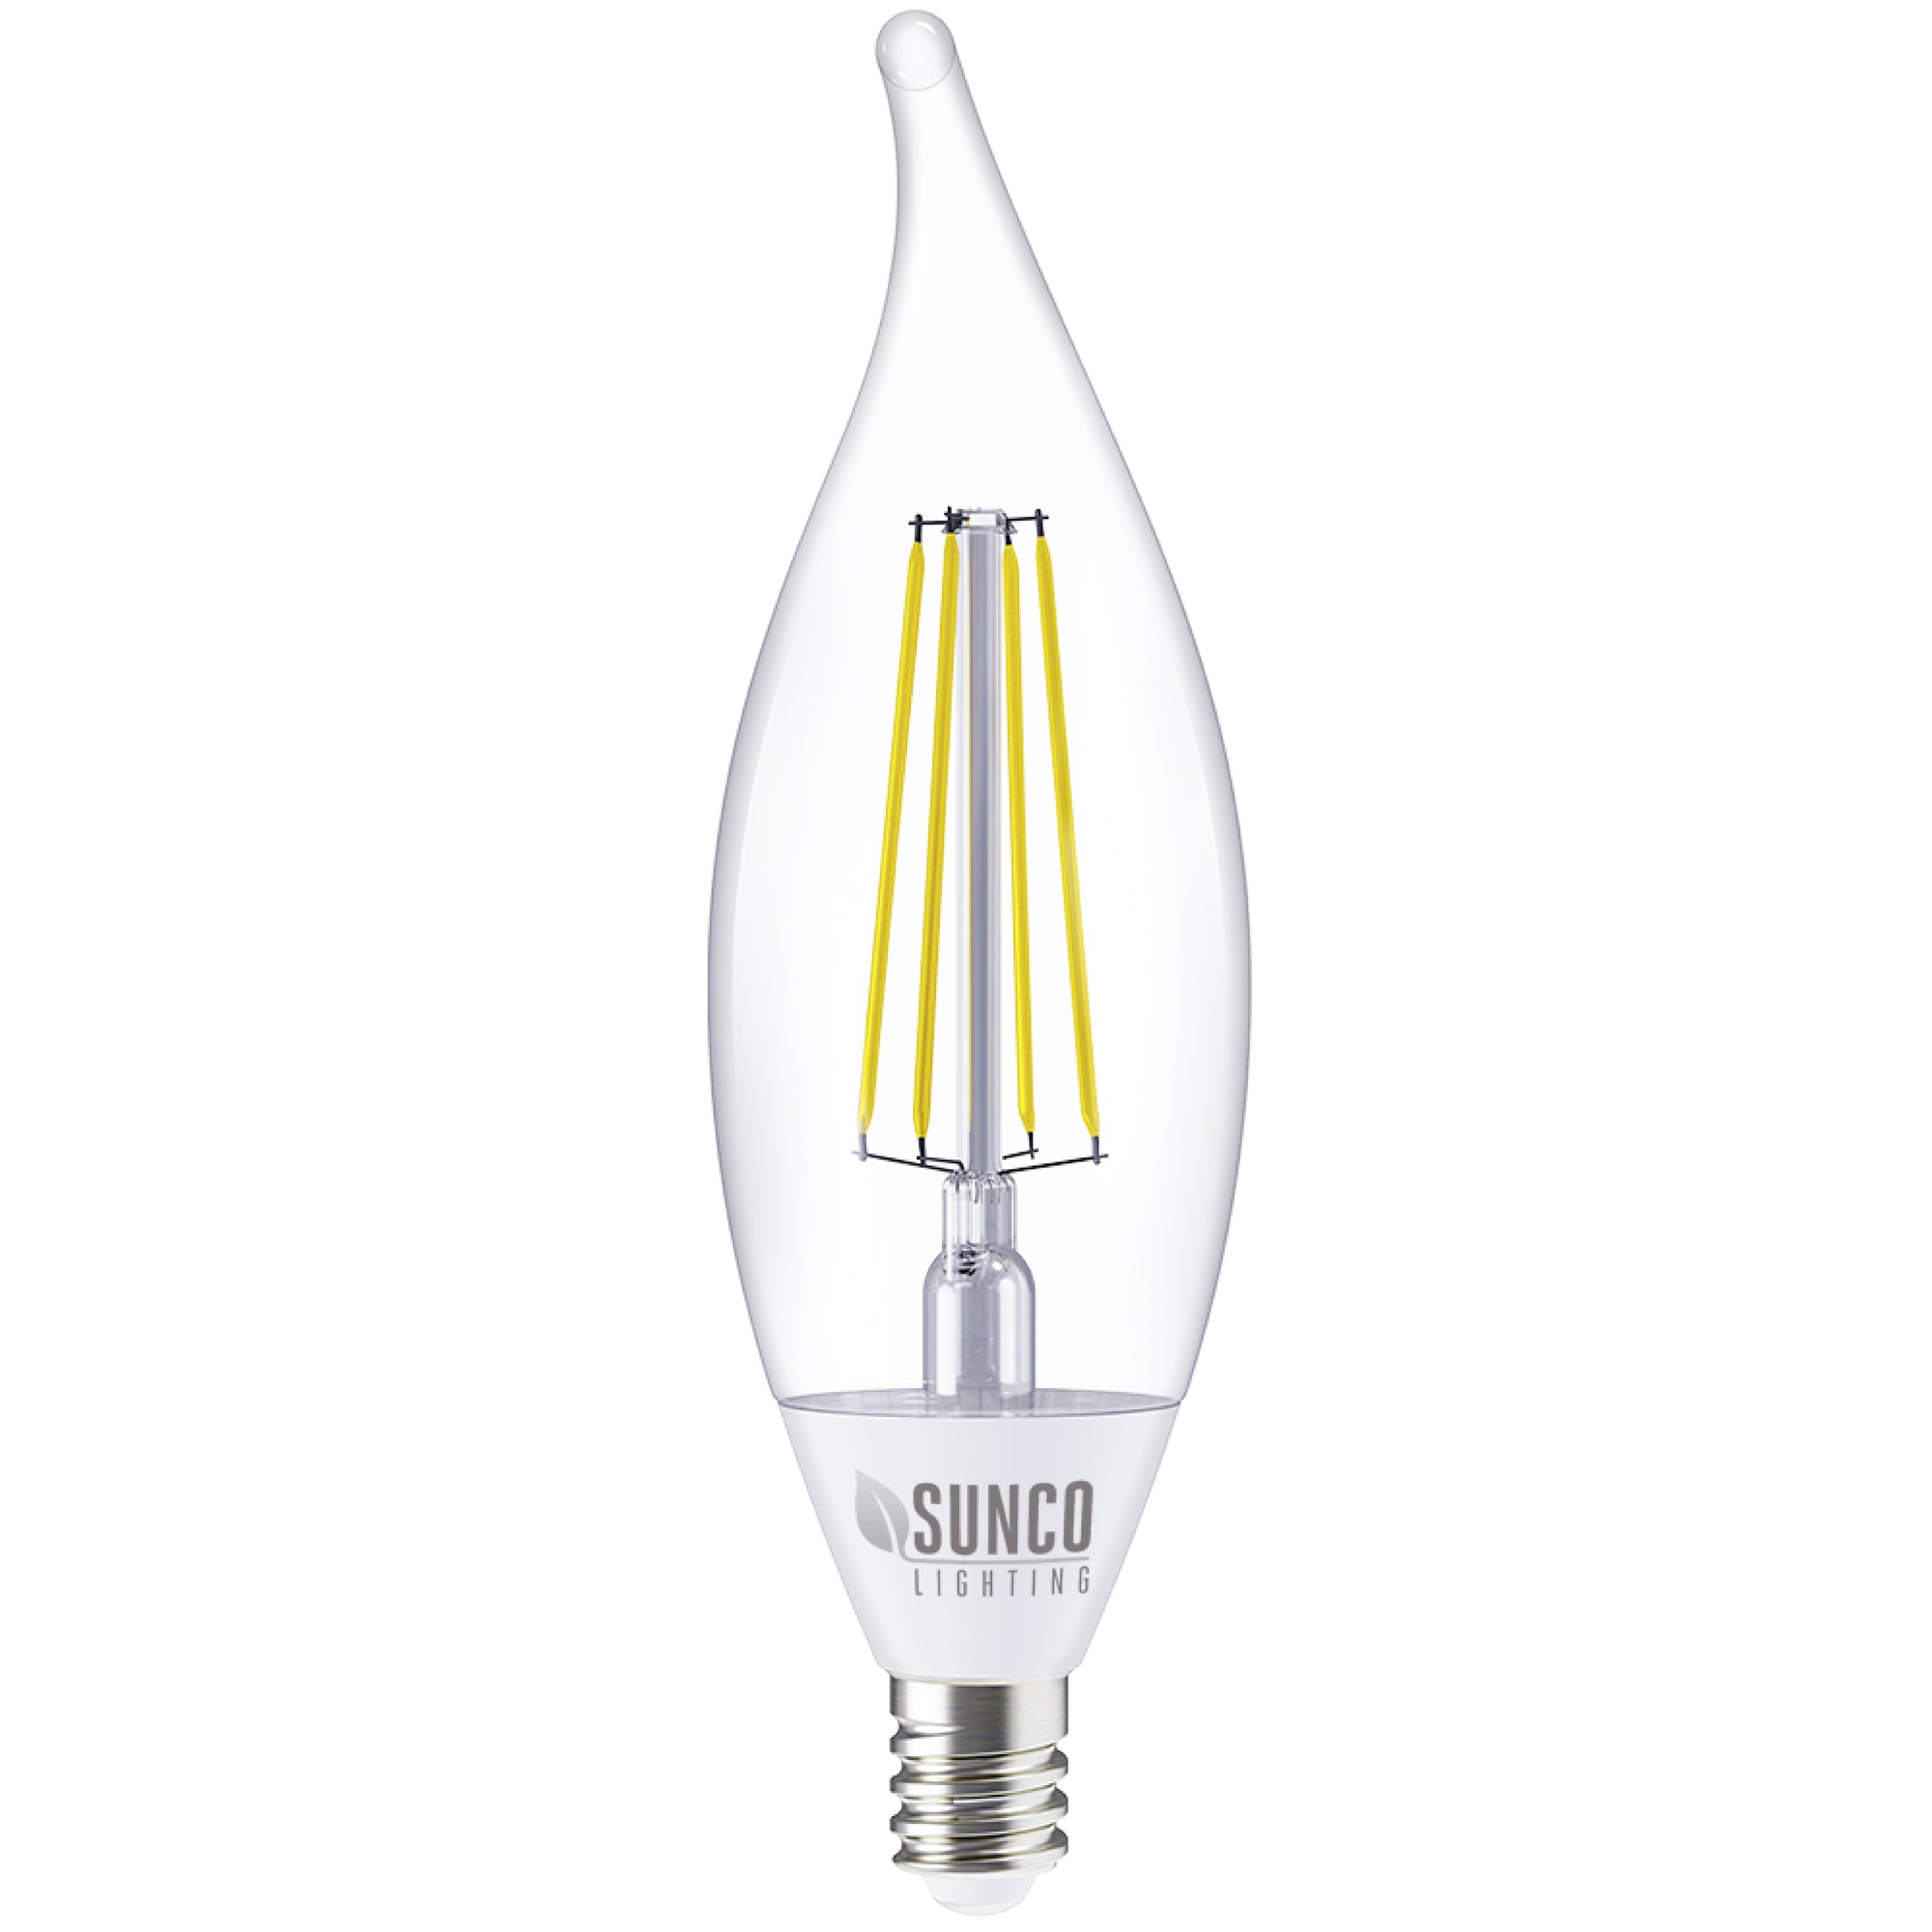 CA11 LED Candelabra Filament Bulb with Dusk to Dawn sensor is an E12 base, wet rated light bulb for outdoor lighting. Great for pendant fixtures, wall sconces, wall lanterns, and other open fixtures where the Dusk to Dawn sensor will be able to detect light levels and automate lighting with auto on/off without a timer. Image here shows the candelabra bulb with the light off so you can see the high tech filament inside the glass housing.